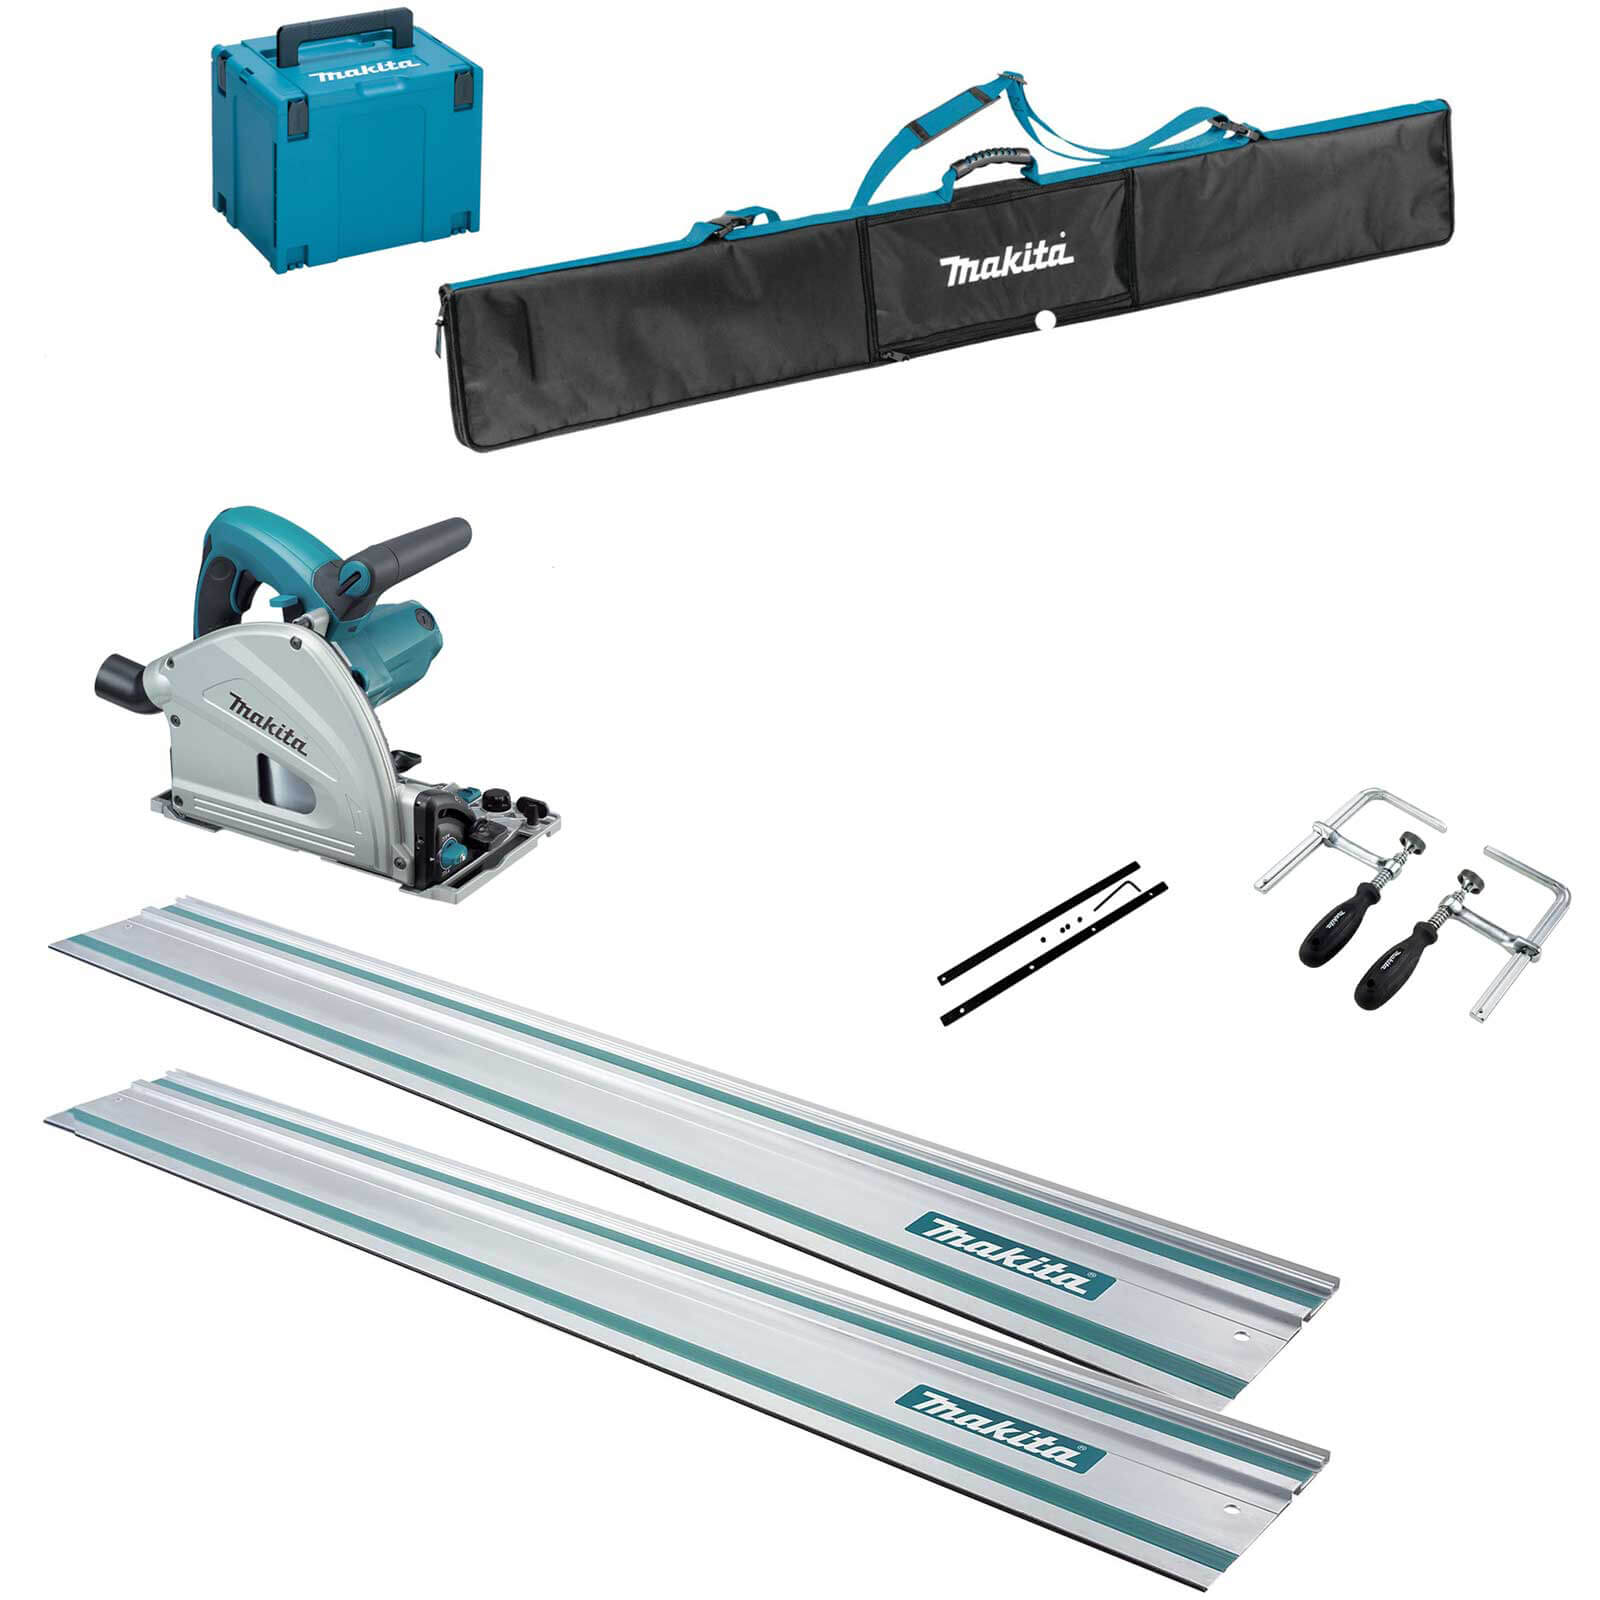 Image of Makita SP6000K6 Plunge Cut Circular Saw and Guide Rail Accessory 6 Piece Set 110v